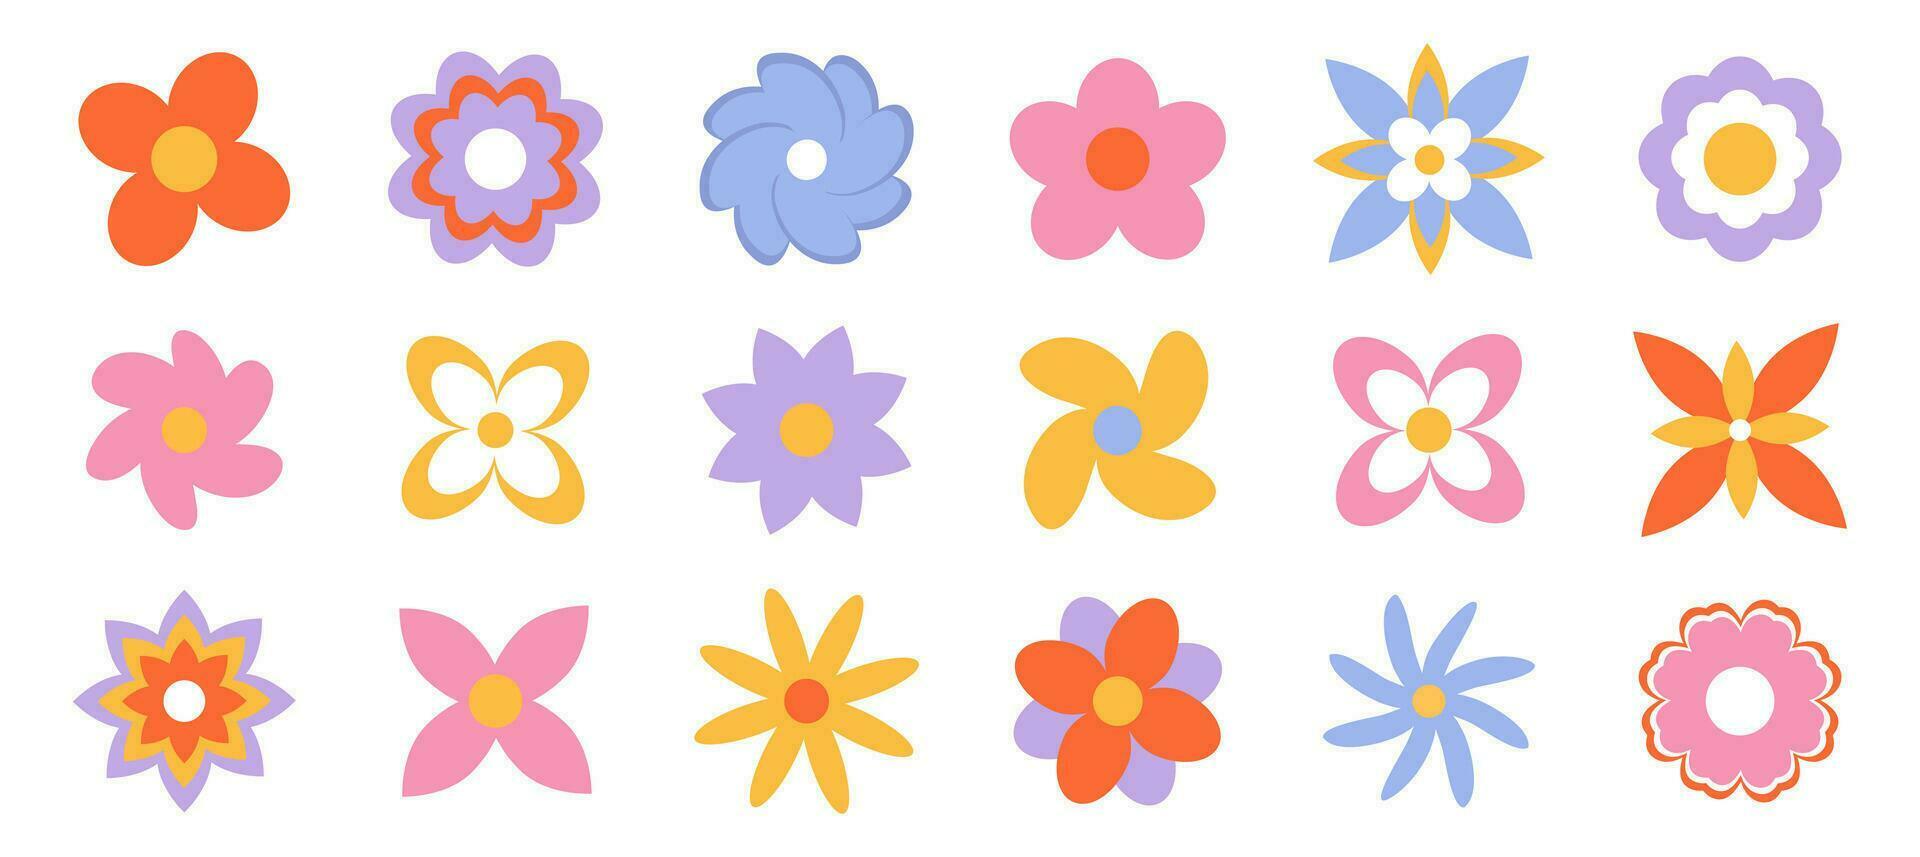 Colorful groovy retro flower daisy set. Hippie stickers. Modern abstract template. Vintage decorative design element. vector